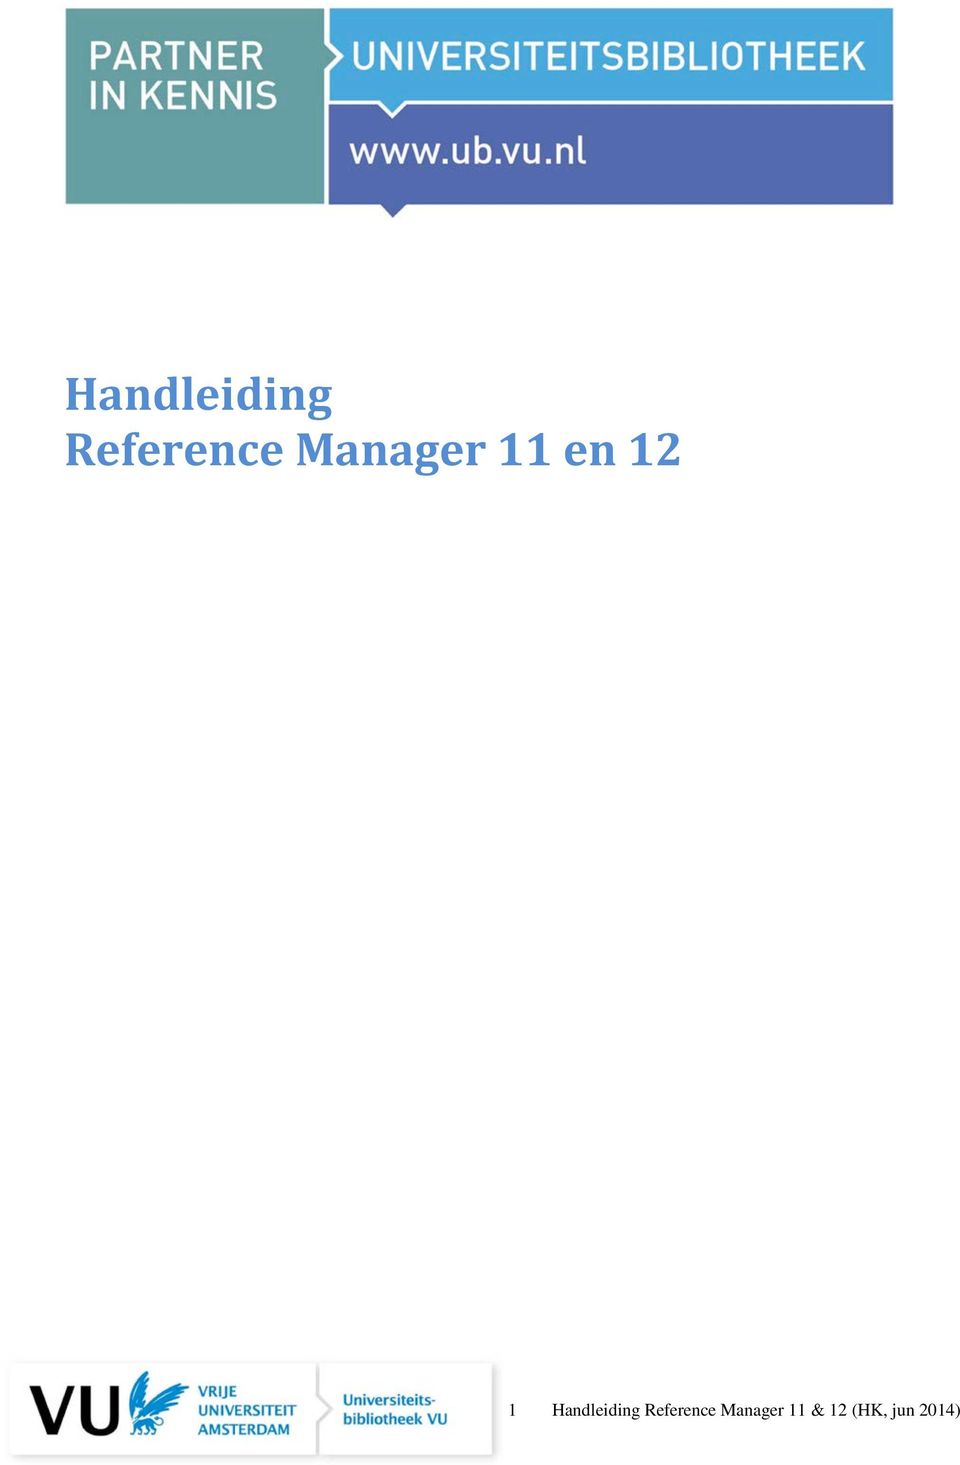 Manager 11 & 12 (HK,